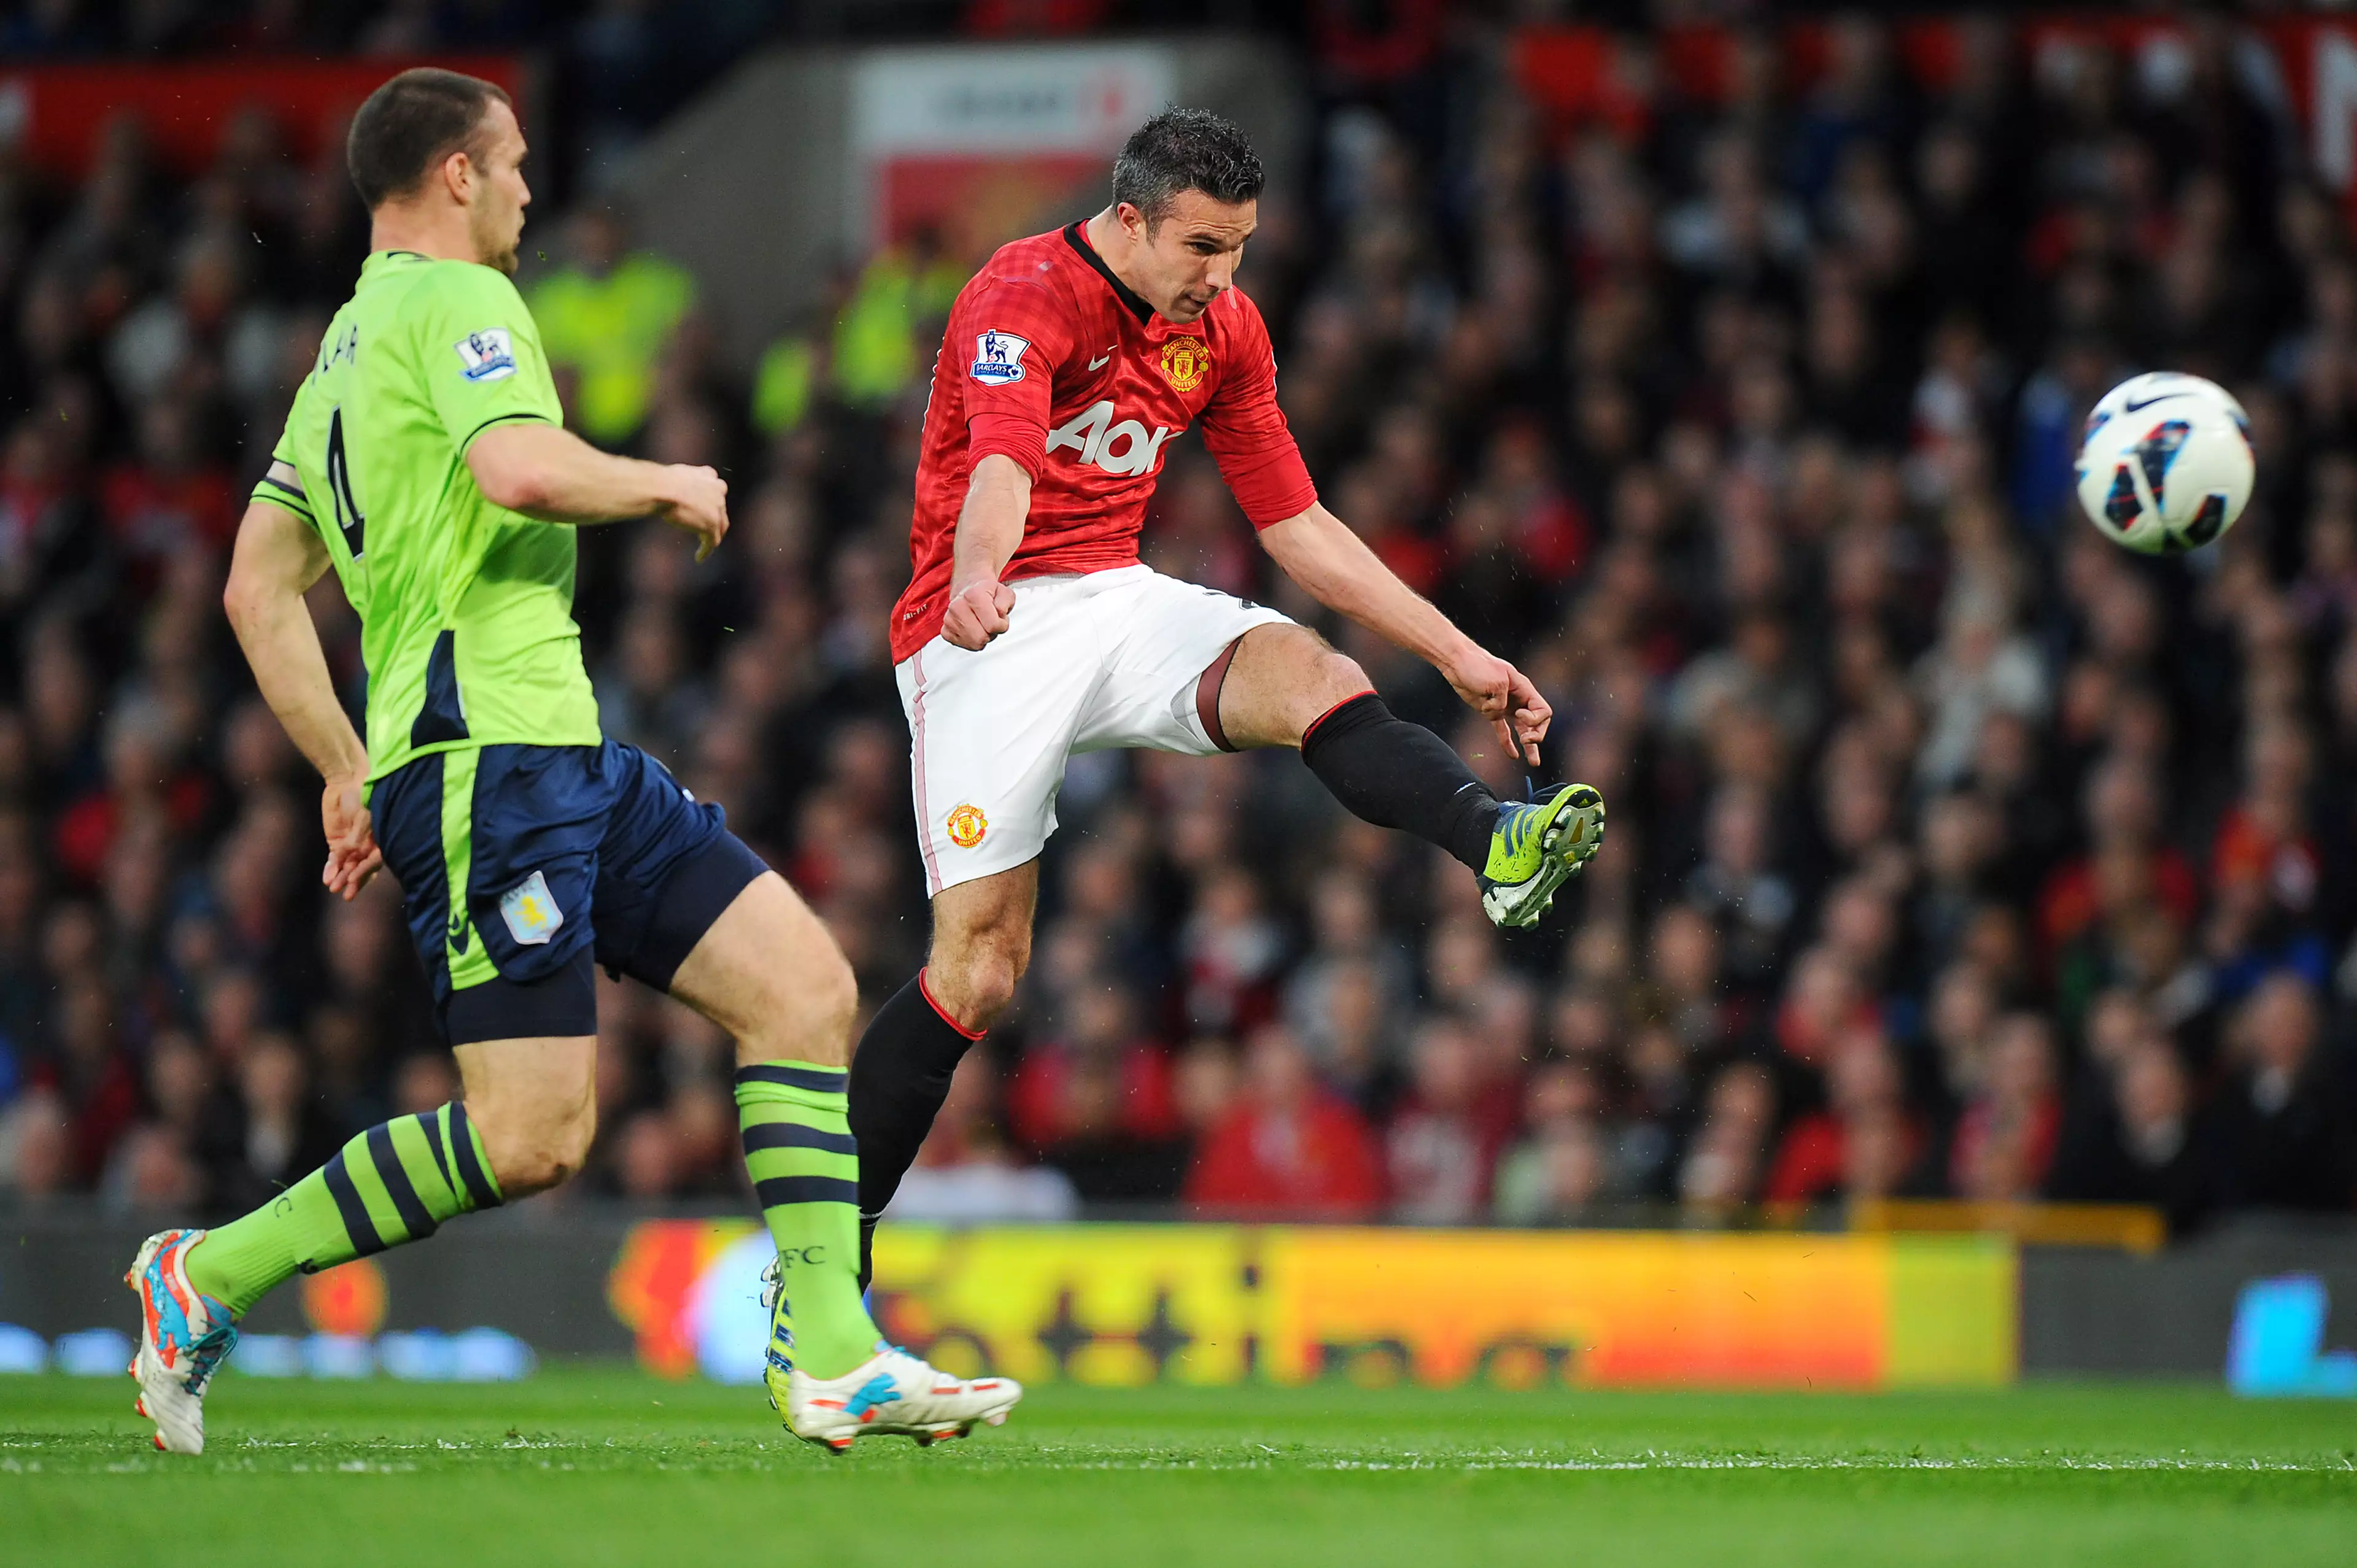 Robin van Persie's special volley against Aston Villa helped seal Manchester United's 20th league title